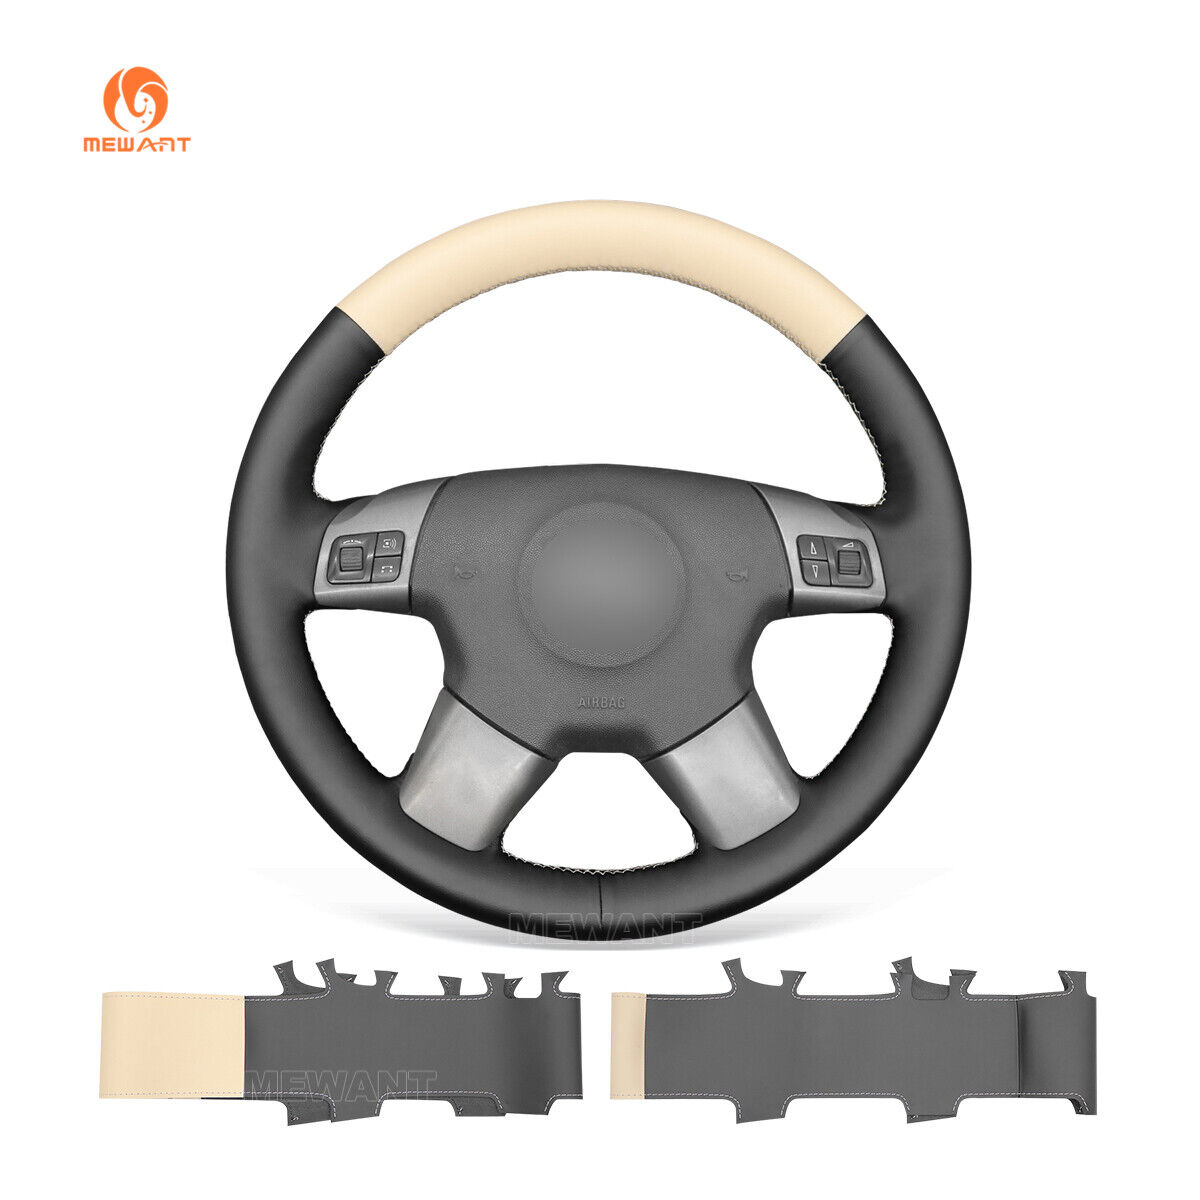 Artificial Leather Steering Wheel Cover for Opel Vectra C 2002-2005 Signum 2003